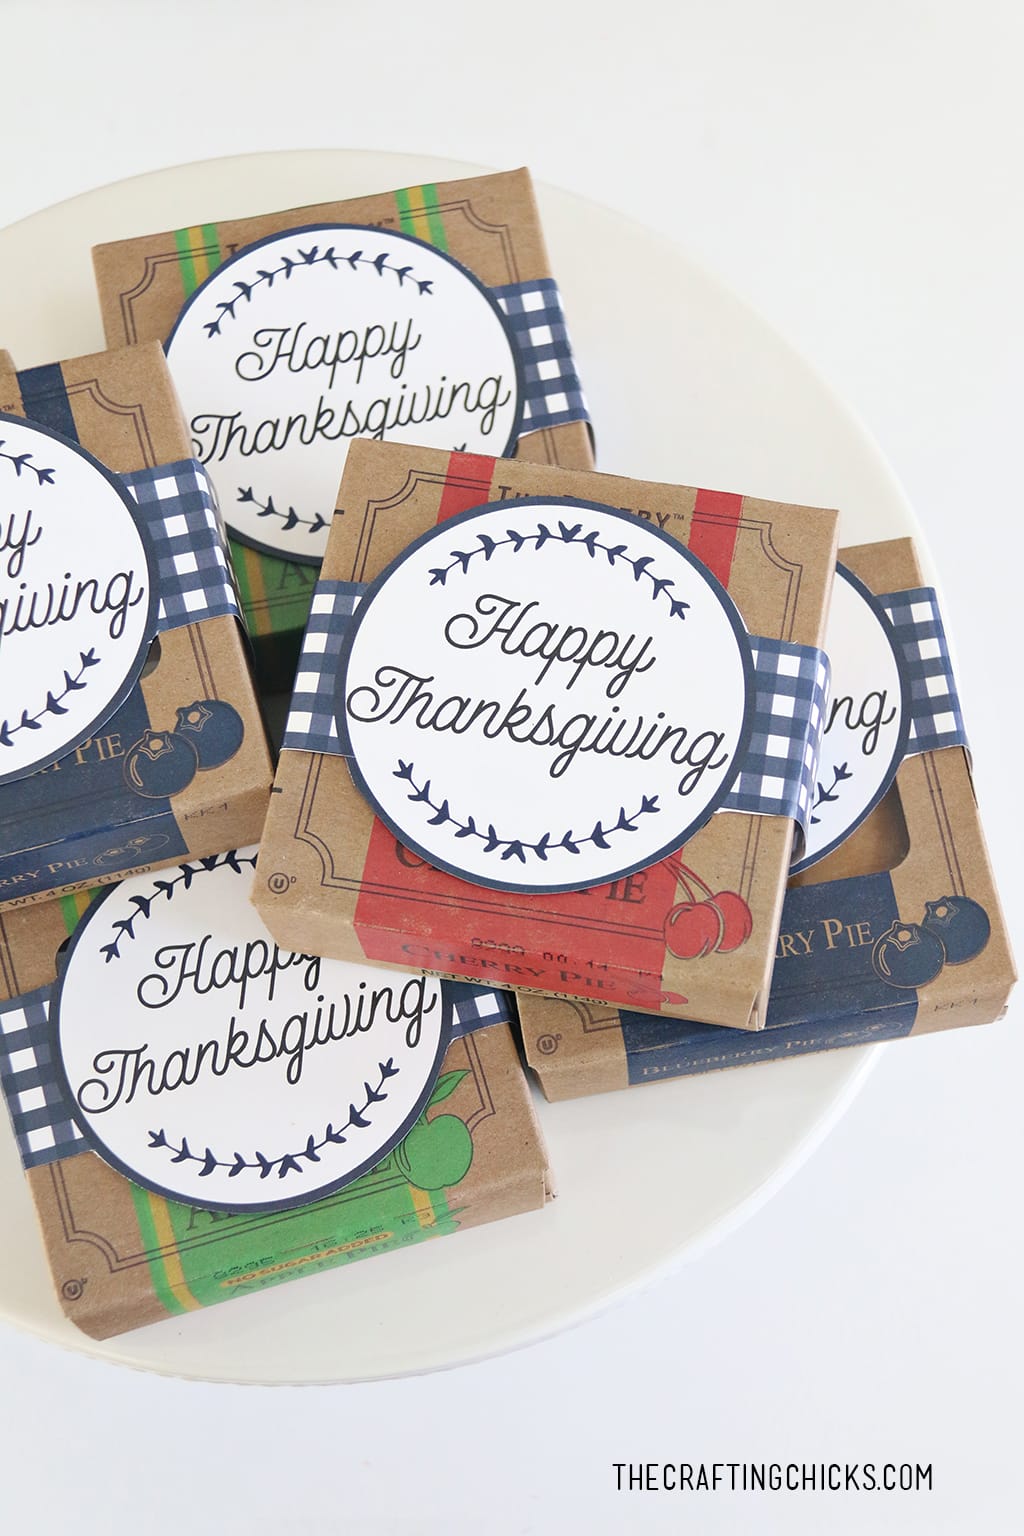 Thanksgiving Mini Pies with Tags for a sweet Thanksgiving treat. Share with family, friends and neighbors or add to festive Thanksgiving Place Settings!